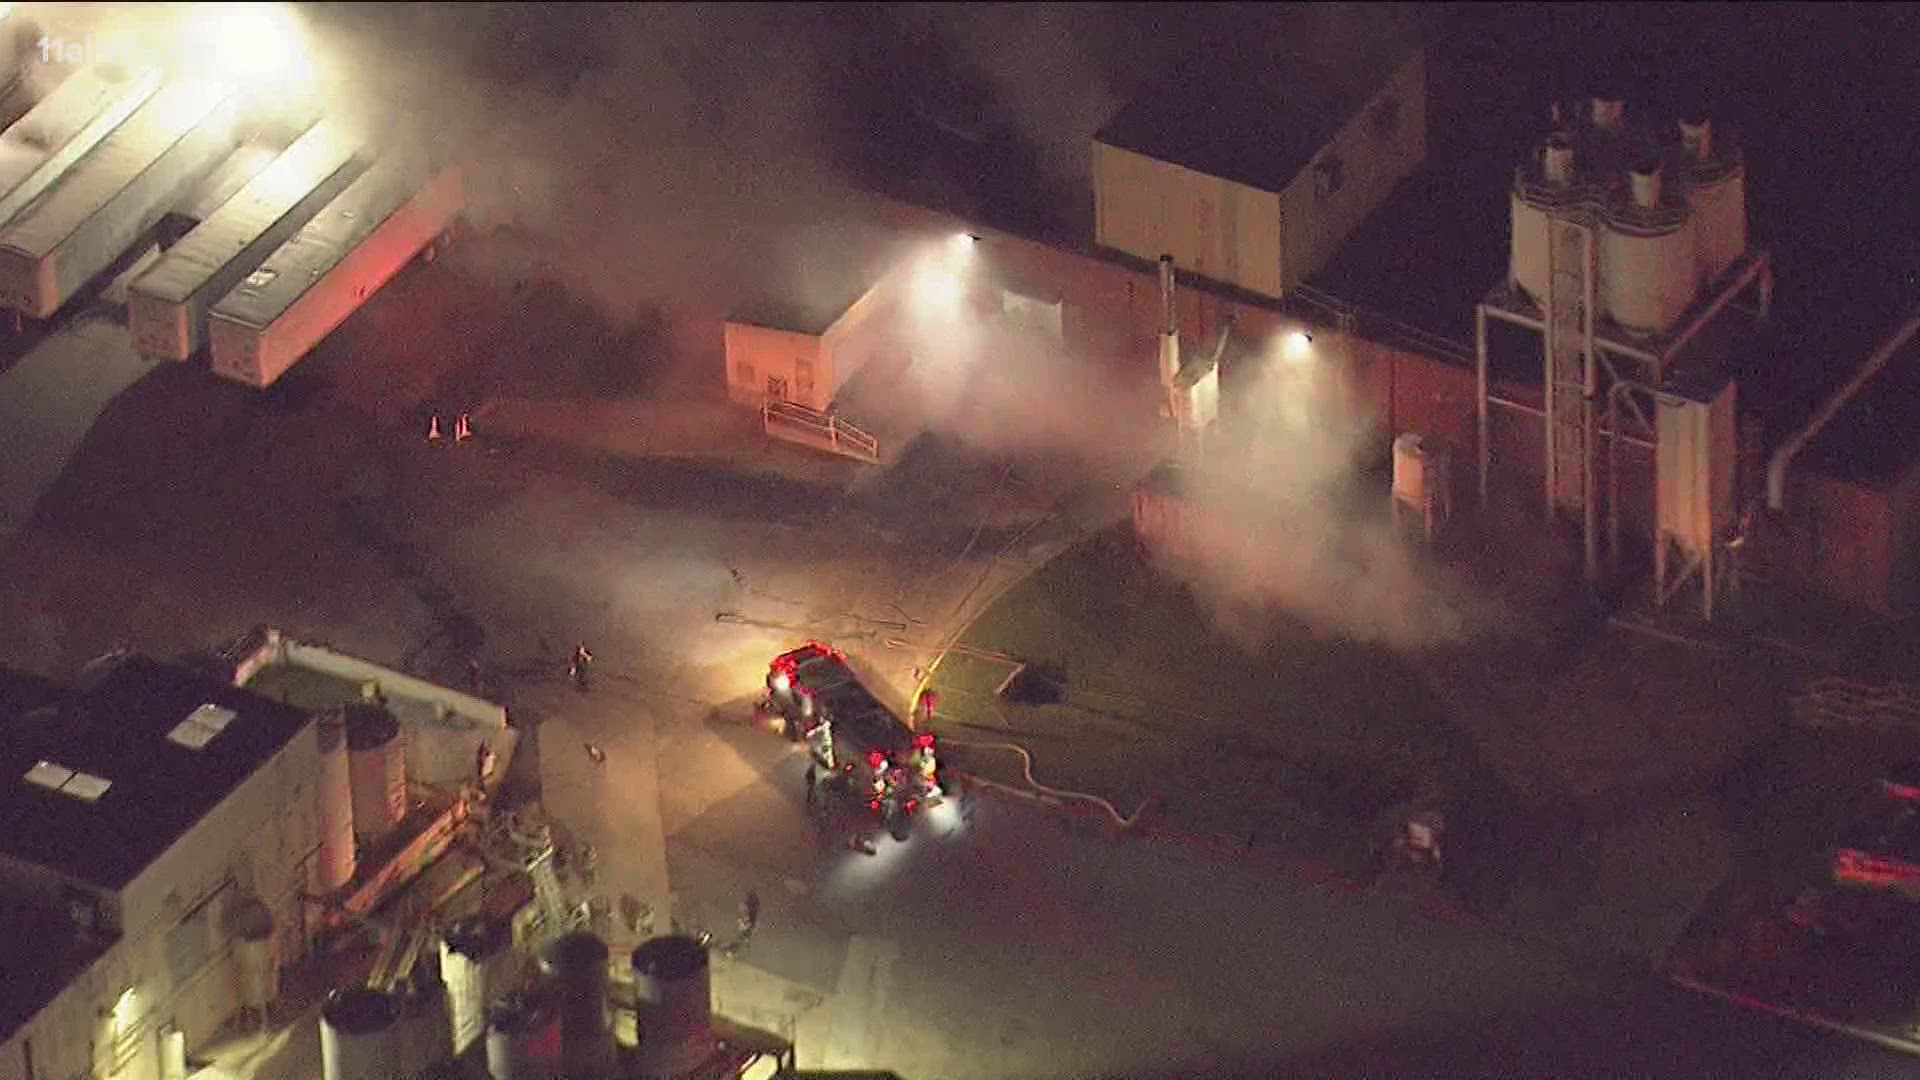 The chemical fire took place at the BioLab on 1700 Old Covington Highway